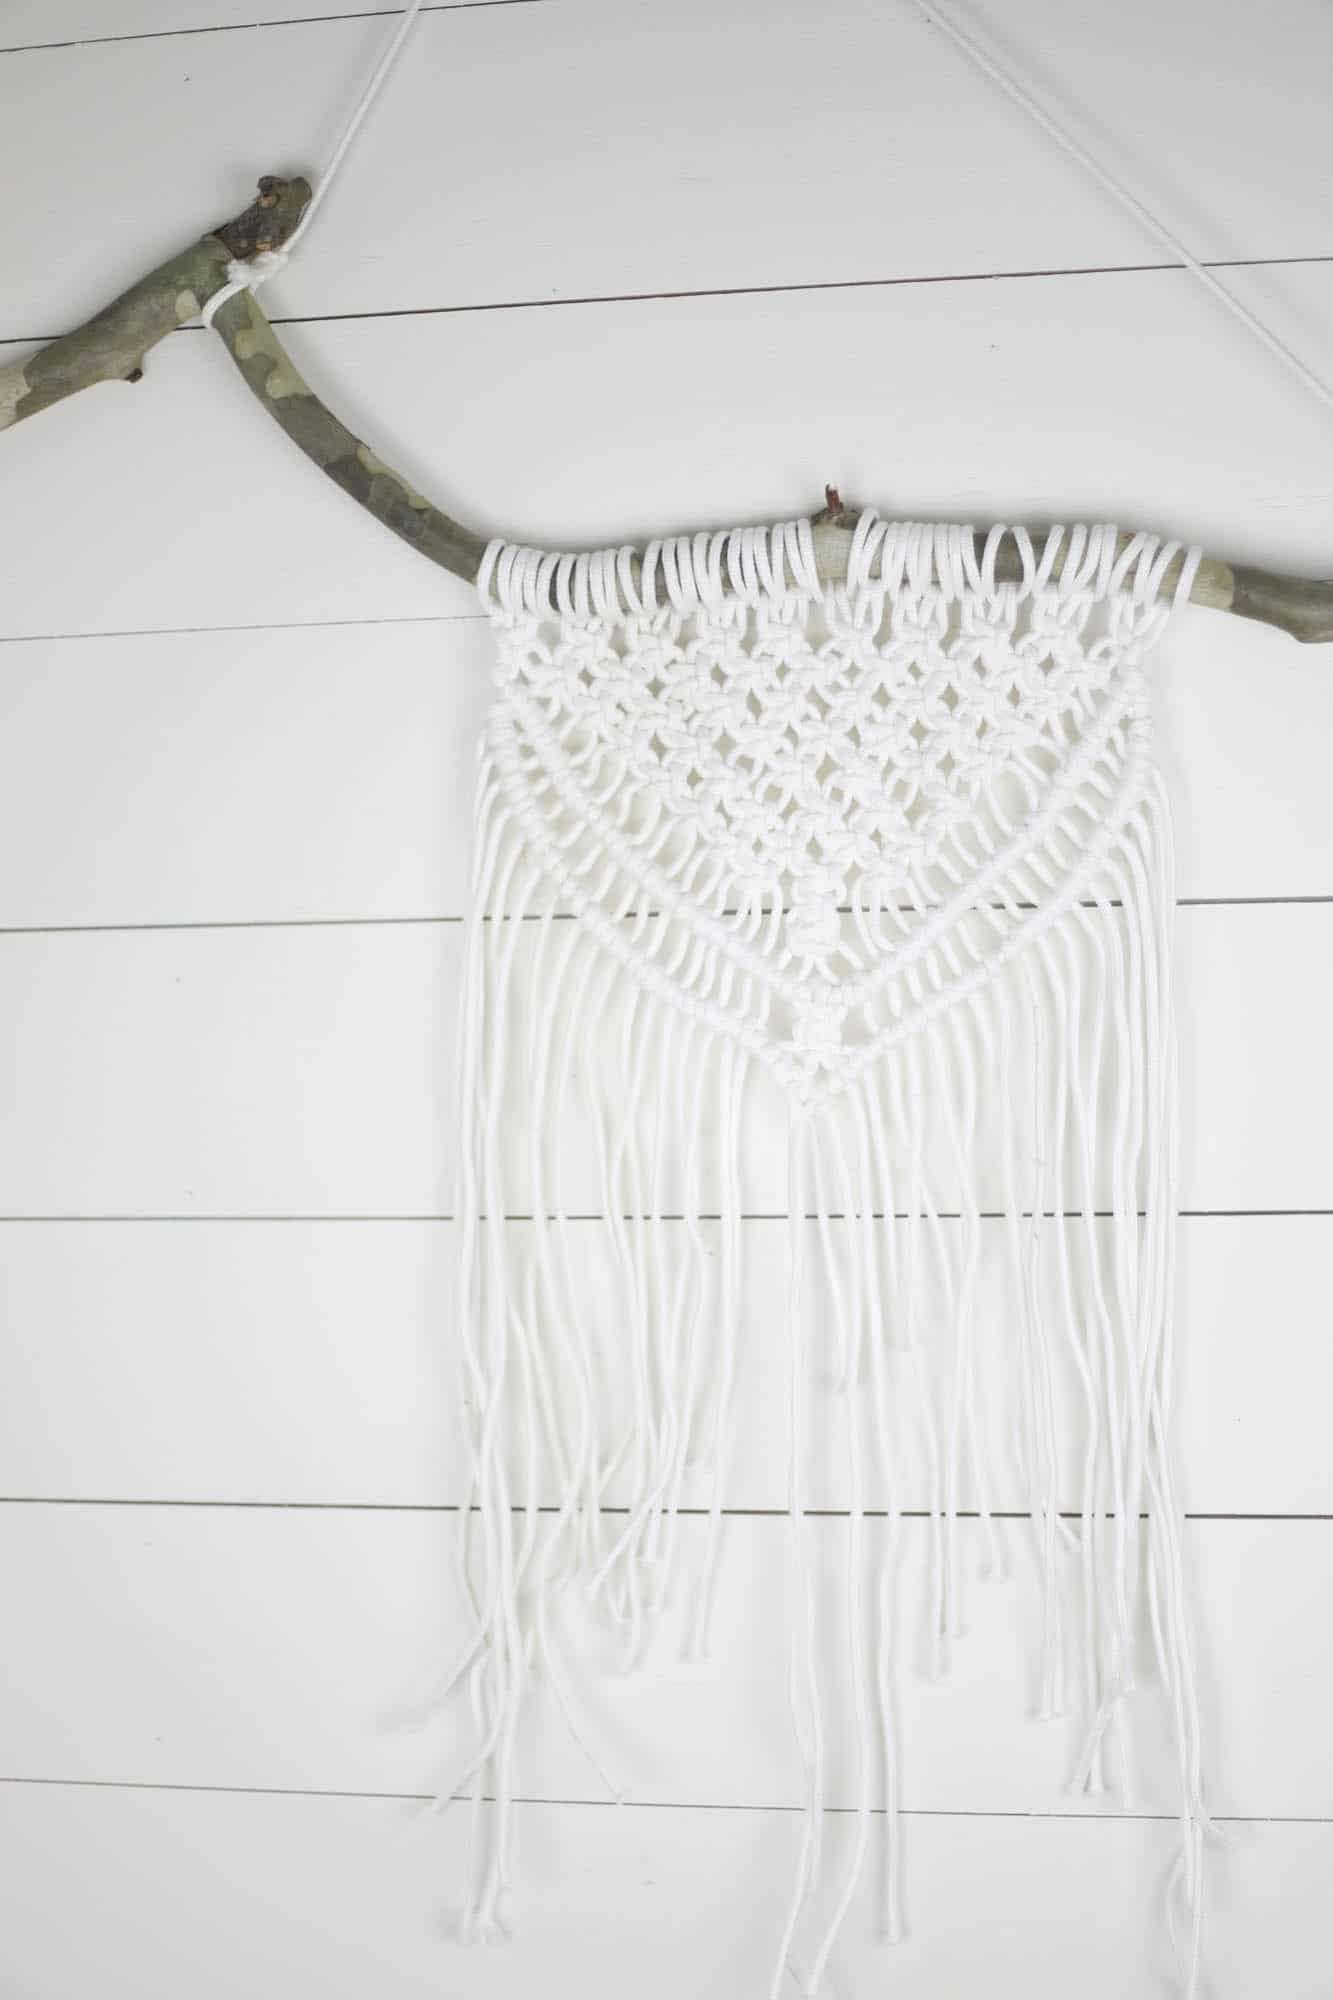 How To Do Macrame - For Beginners - Farmhouse on Boone